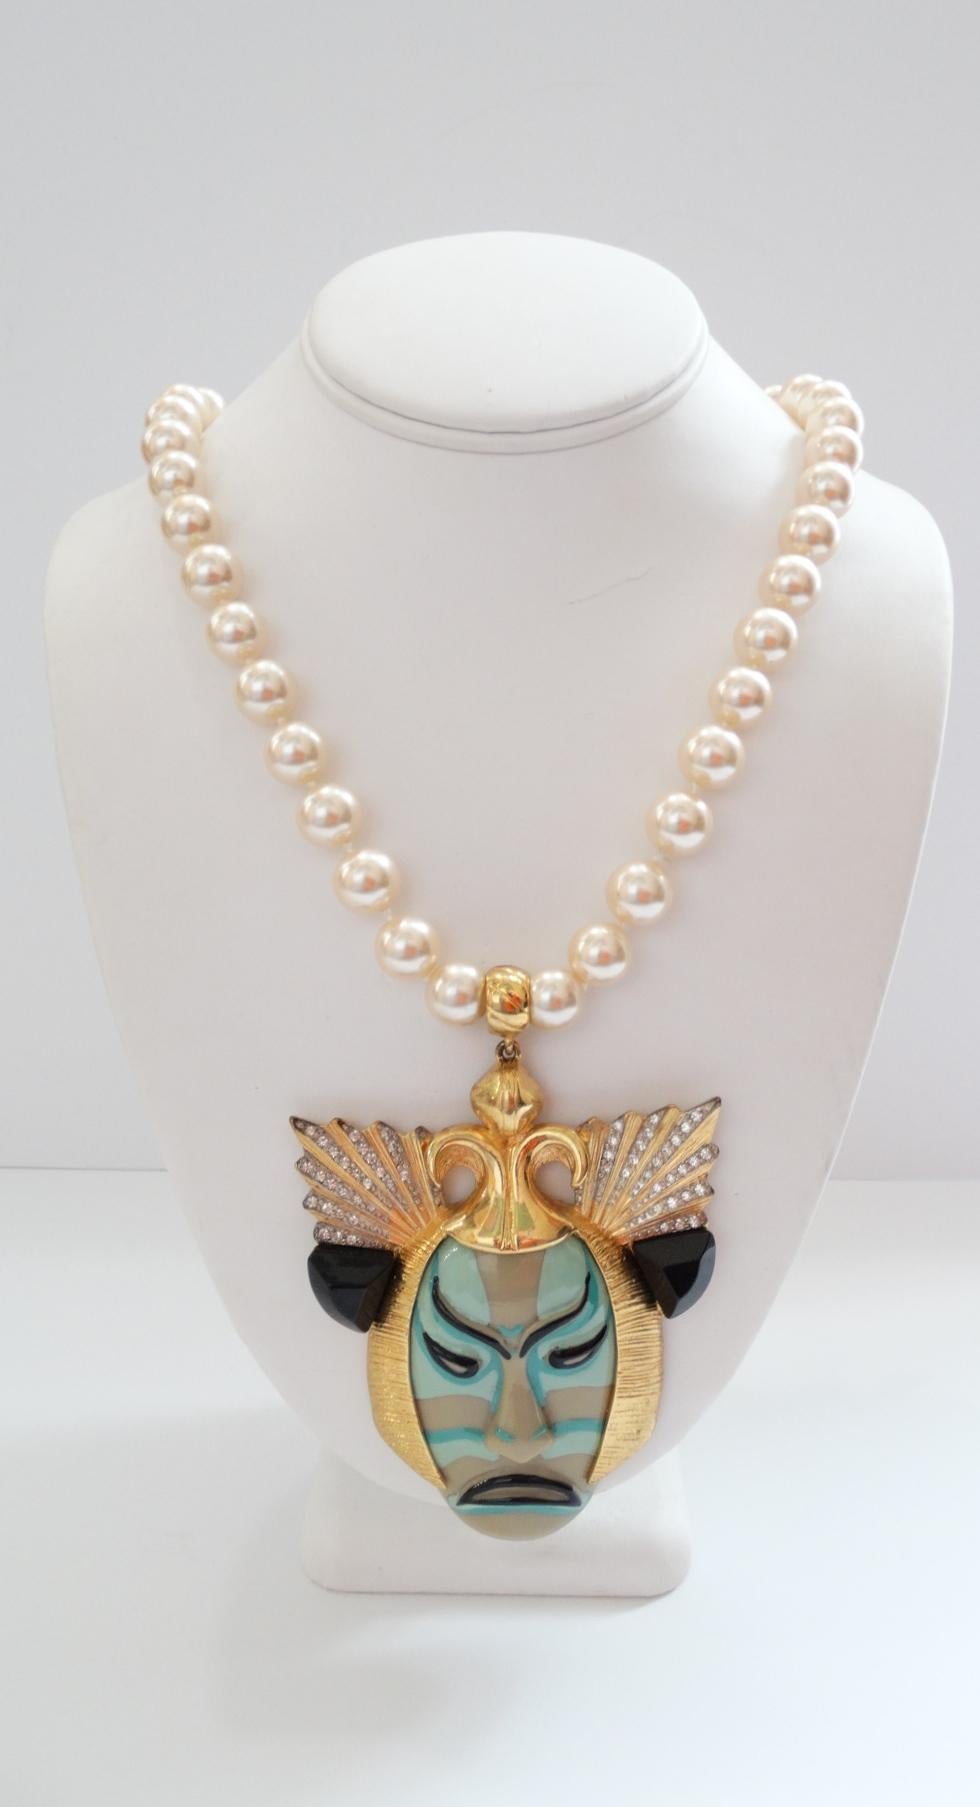 Make a statement with our incredible 1980s Samurai inspired pendant necklace from none other than the house of Valentino! Oversized mask-like pendant done up in the style of Ancient Samurai imagery- enamel glazed and gilded in a bright gold.